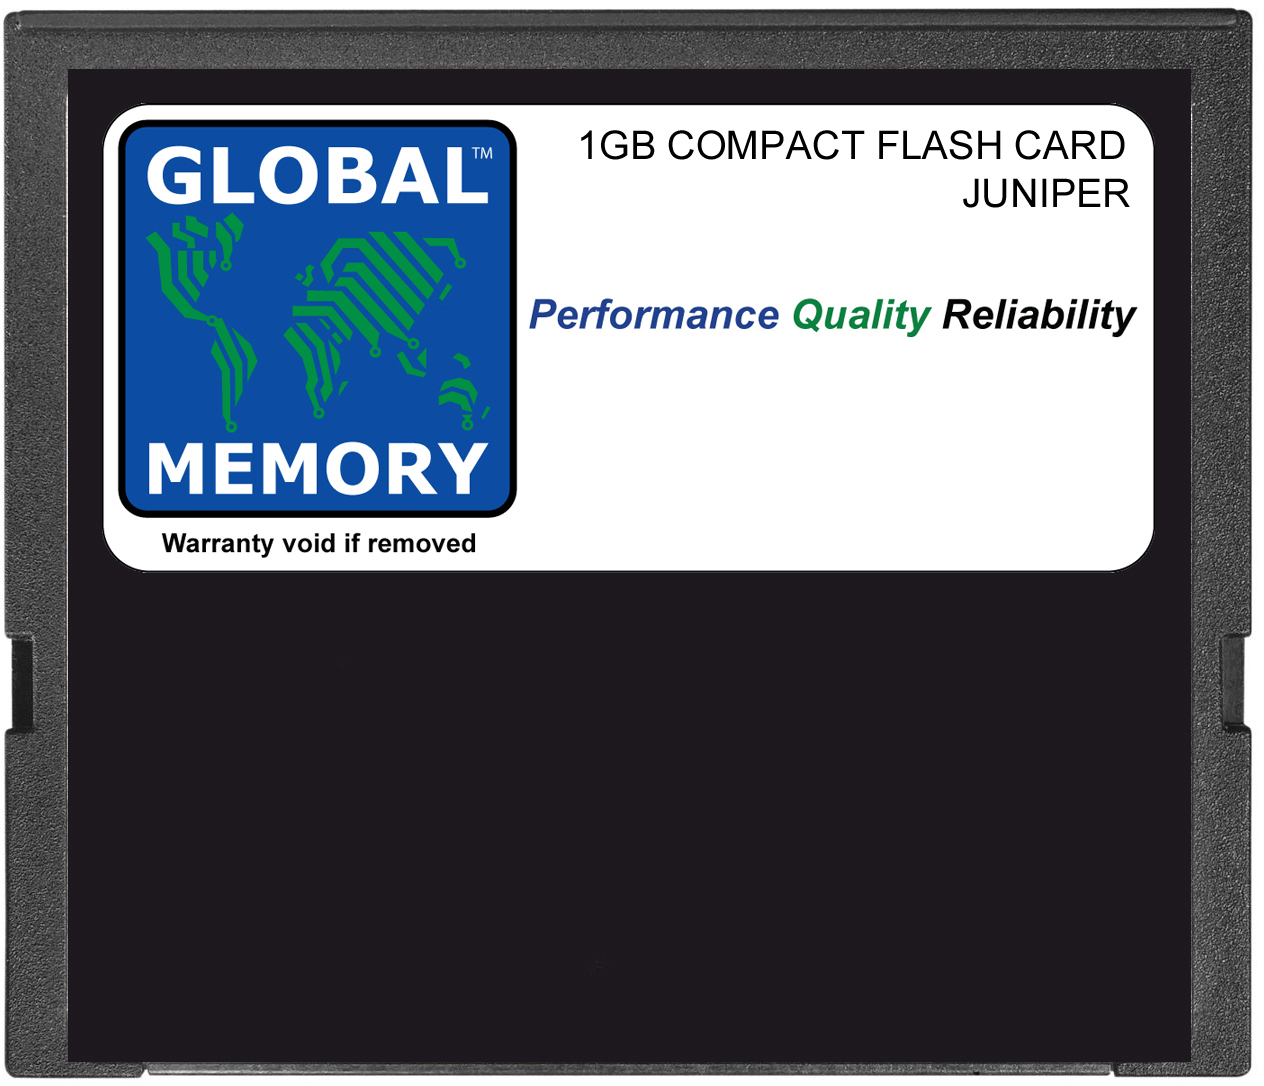 1GB COMPACT FLASH CARD MEMORY FOR JUNIPER RE-5.0 / RE-400 / RE-850 ROUTING ENGINES (CF-UPG2-1G-S)